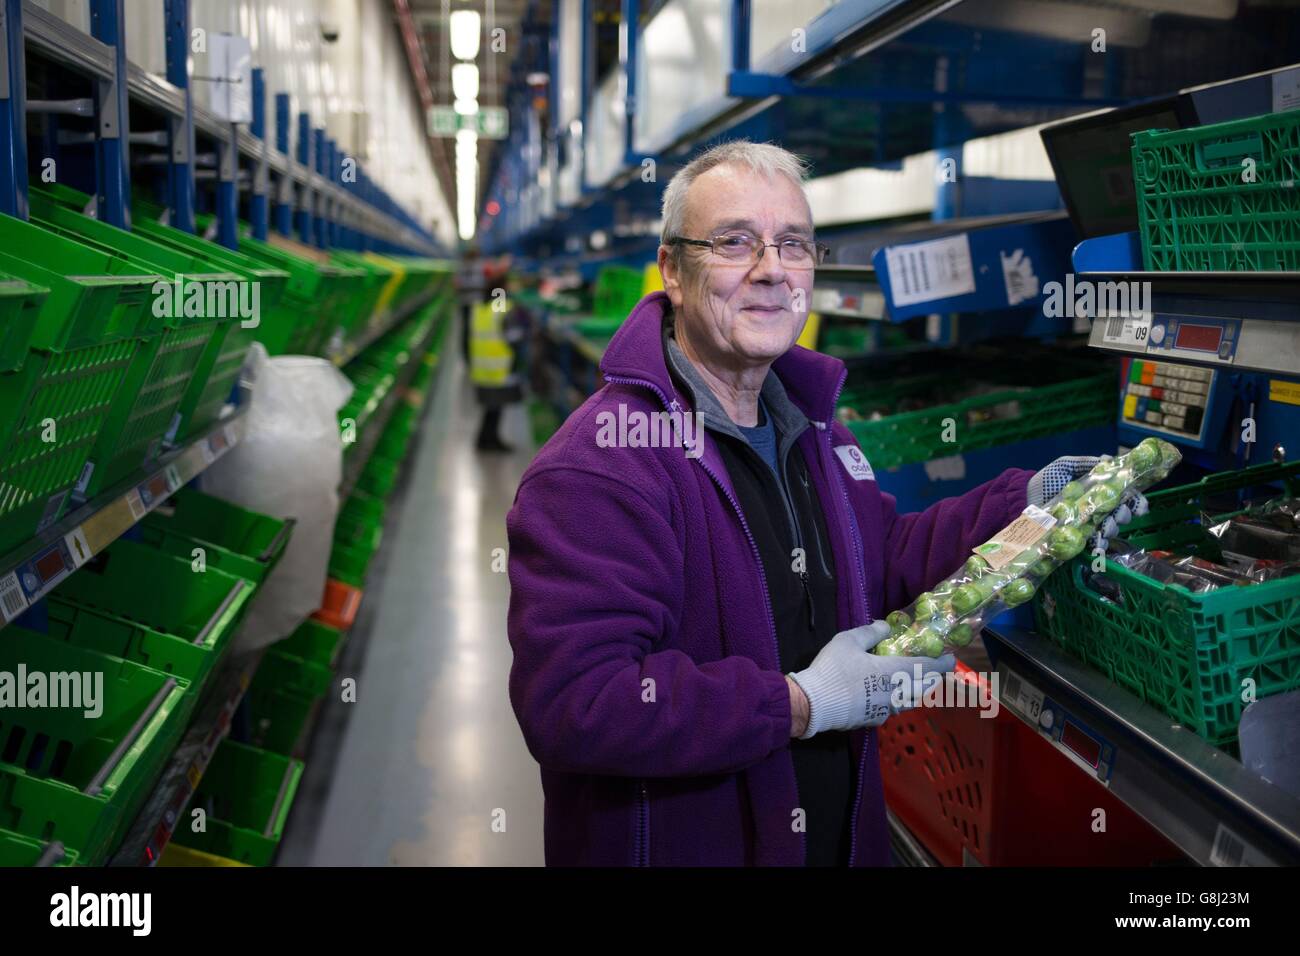 A staff member packs sprouts in Ocado's Customer Fulfilment Centre in Hatfield, which over the Christmas period this year expects to handle 1.5 million mince pies (enough to line the route of the London Marathon), over 2.5 million canapes (about the length of Hadrian's Wall) and more than 14 tonnes of cranberry sauce. Stock Photo